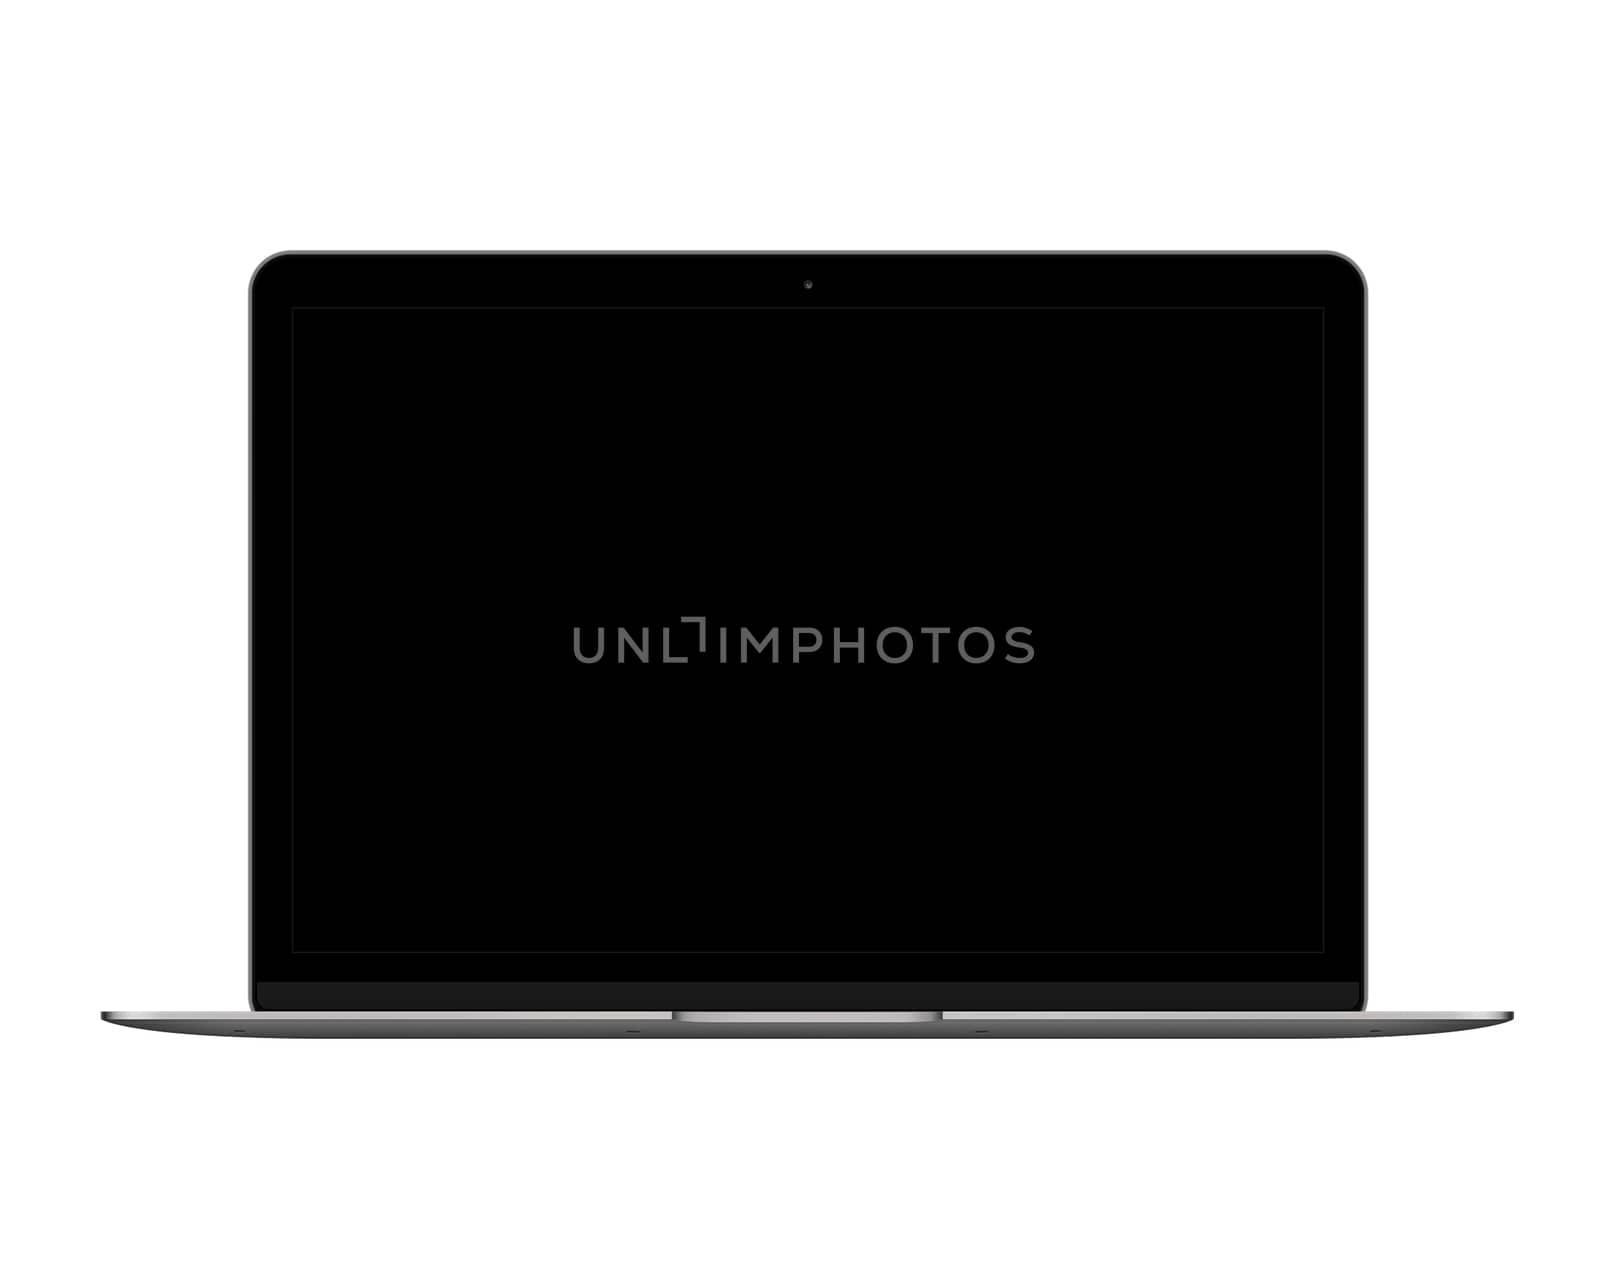 Isolated space gray laptop computer mockup on white background